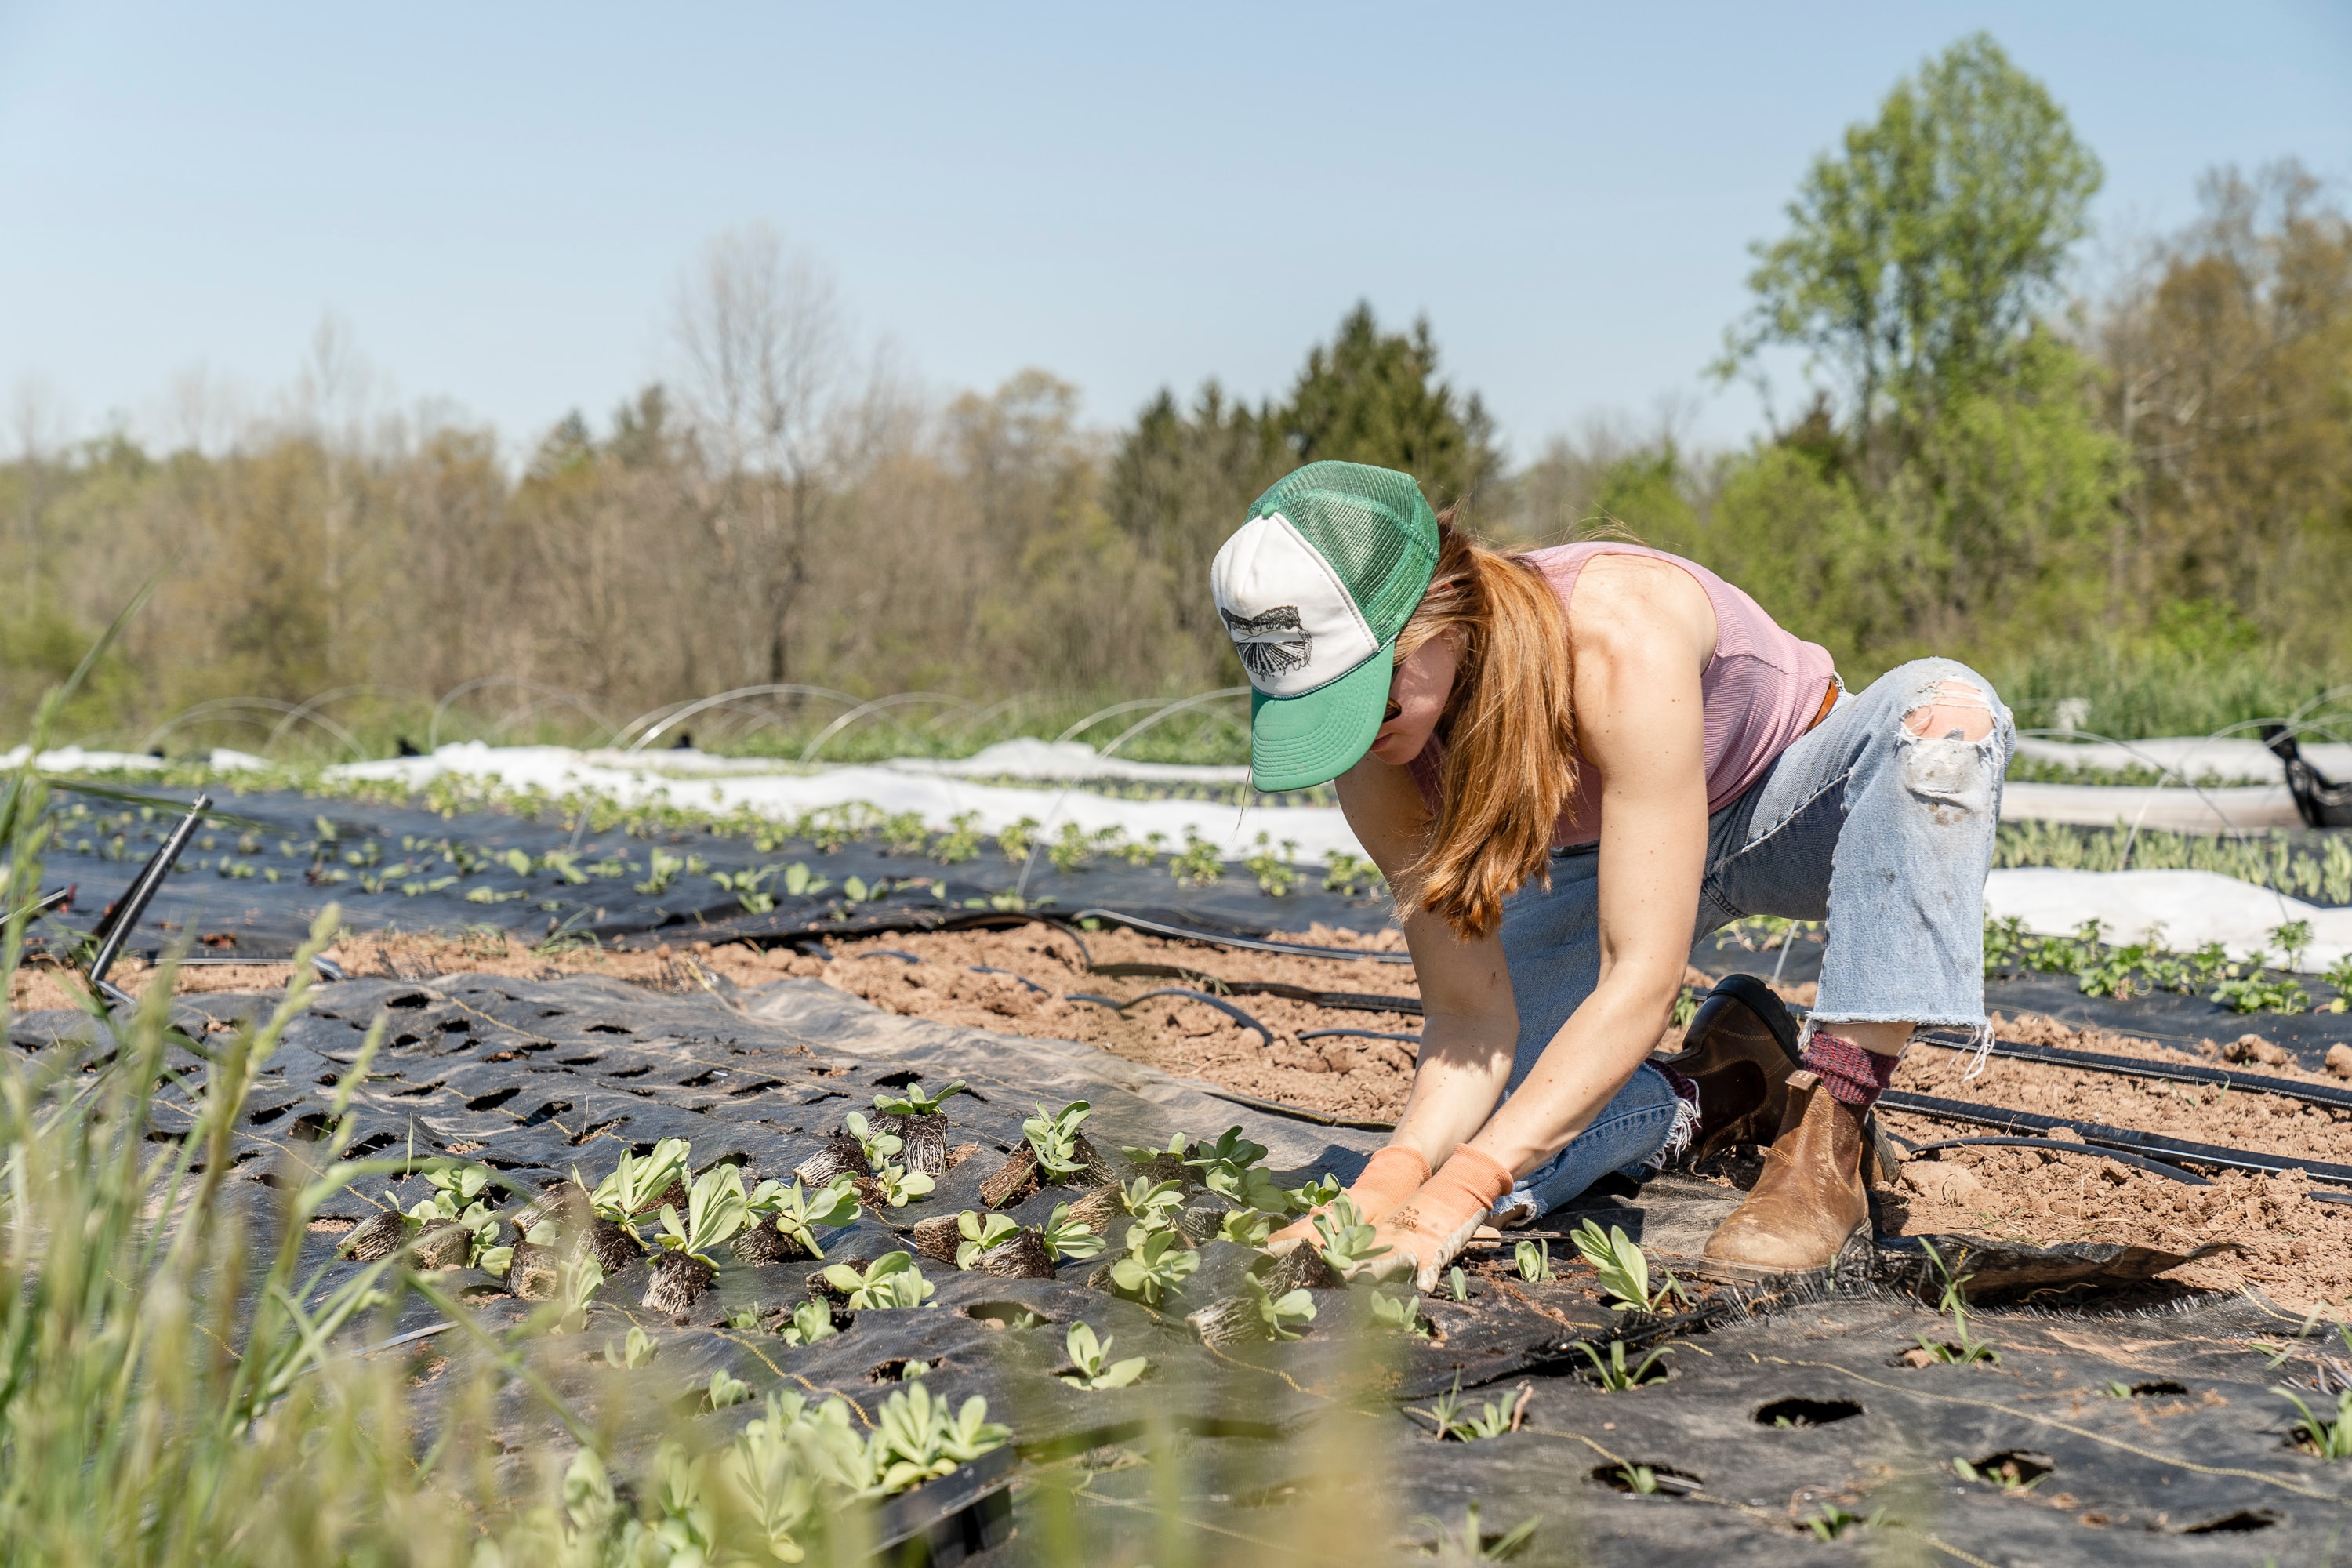 A woman wearing tatty jeans and a cap carefully handles some grain plant seedlings